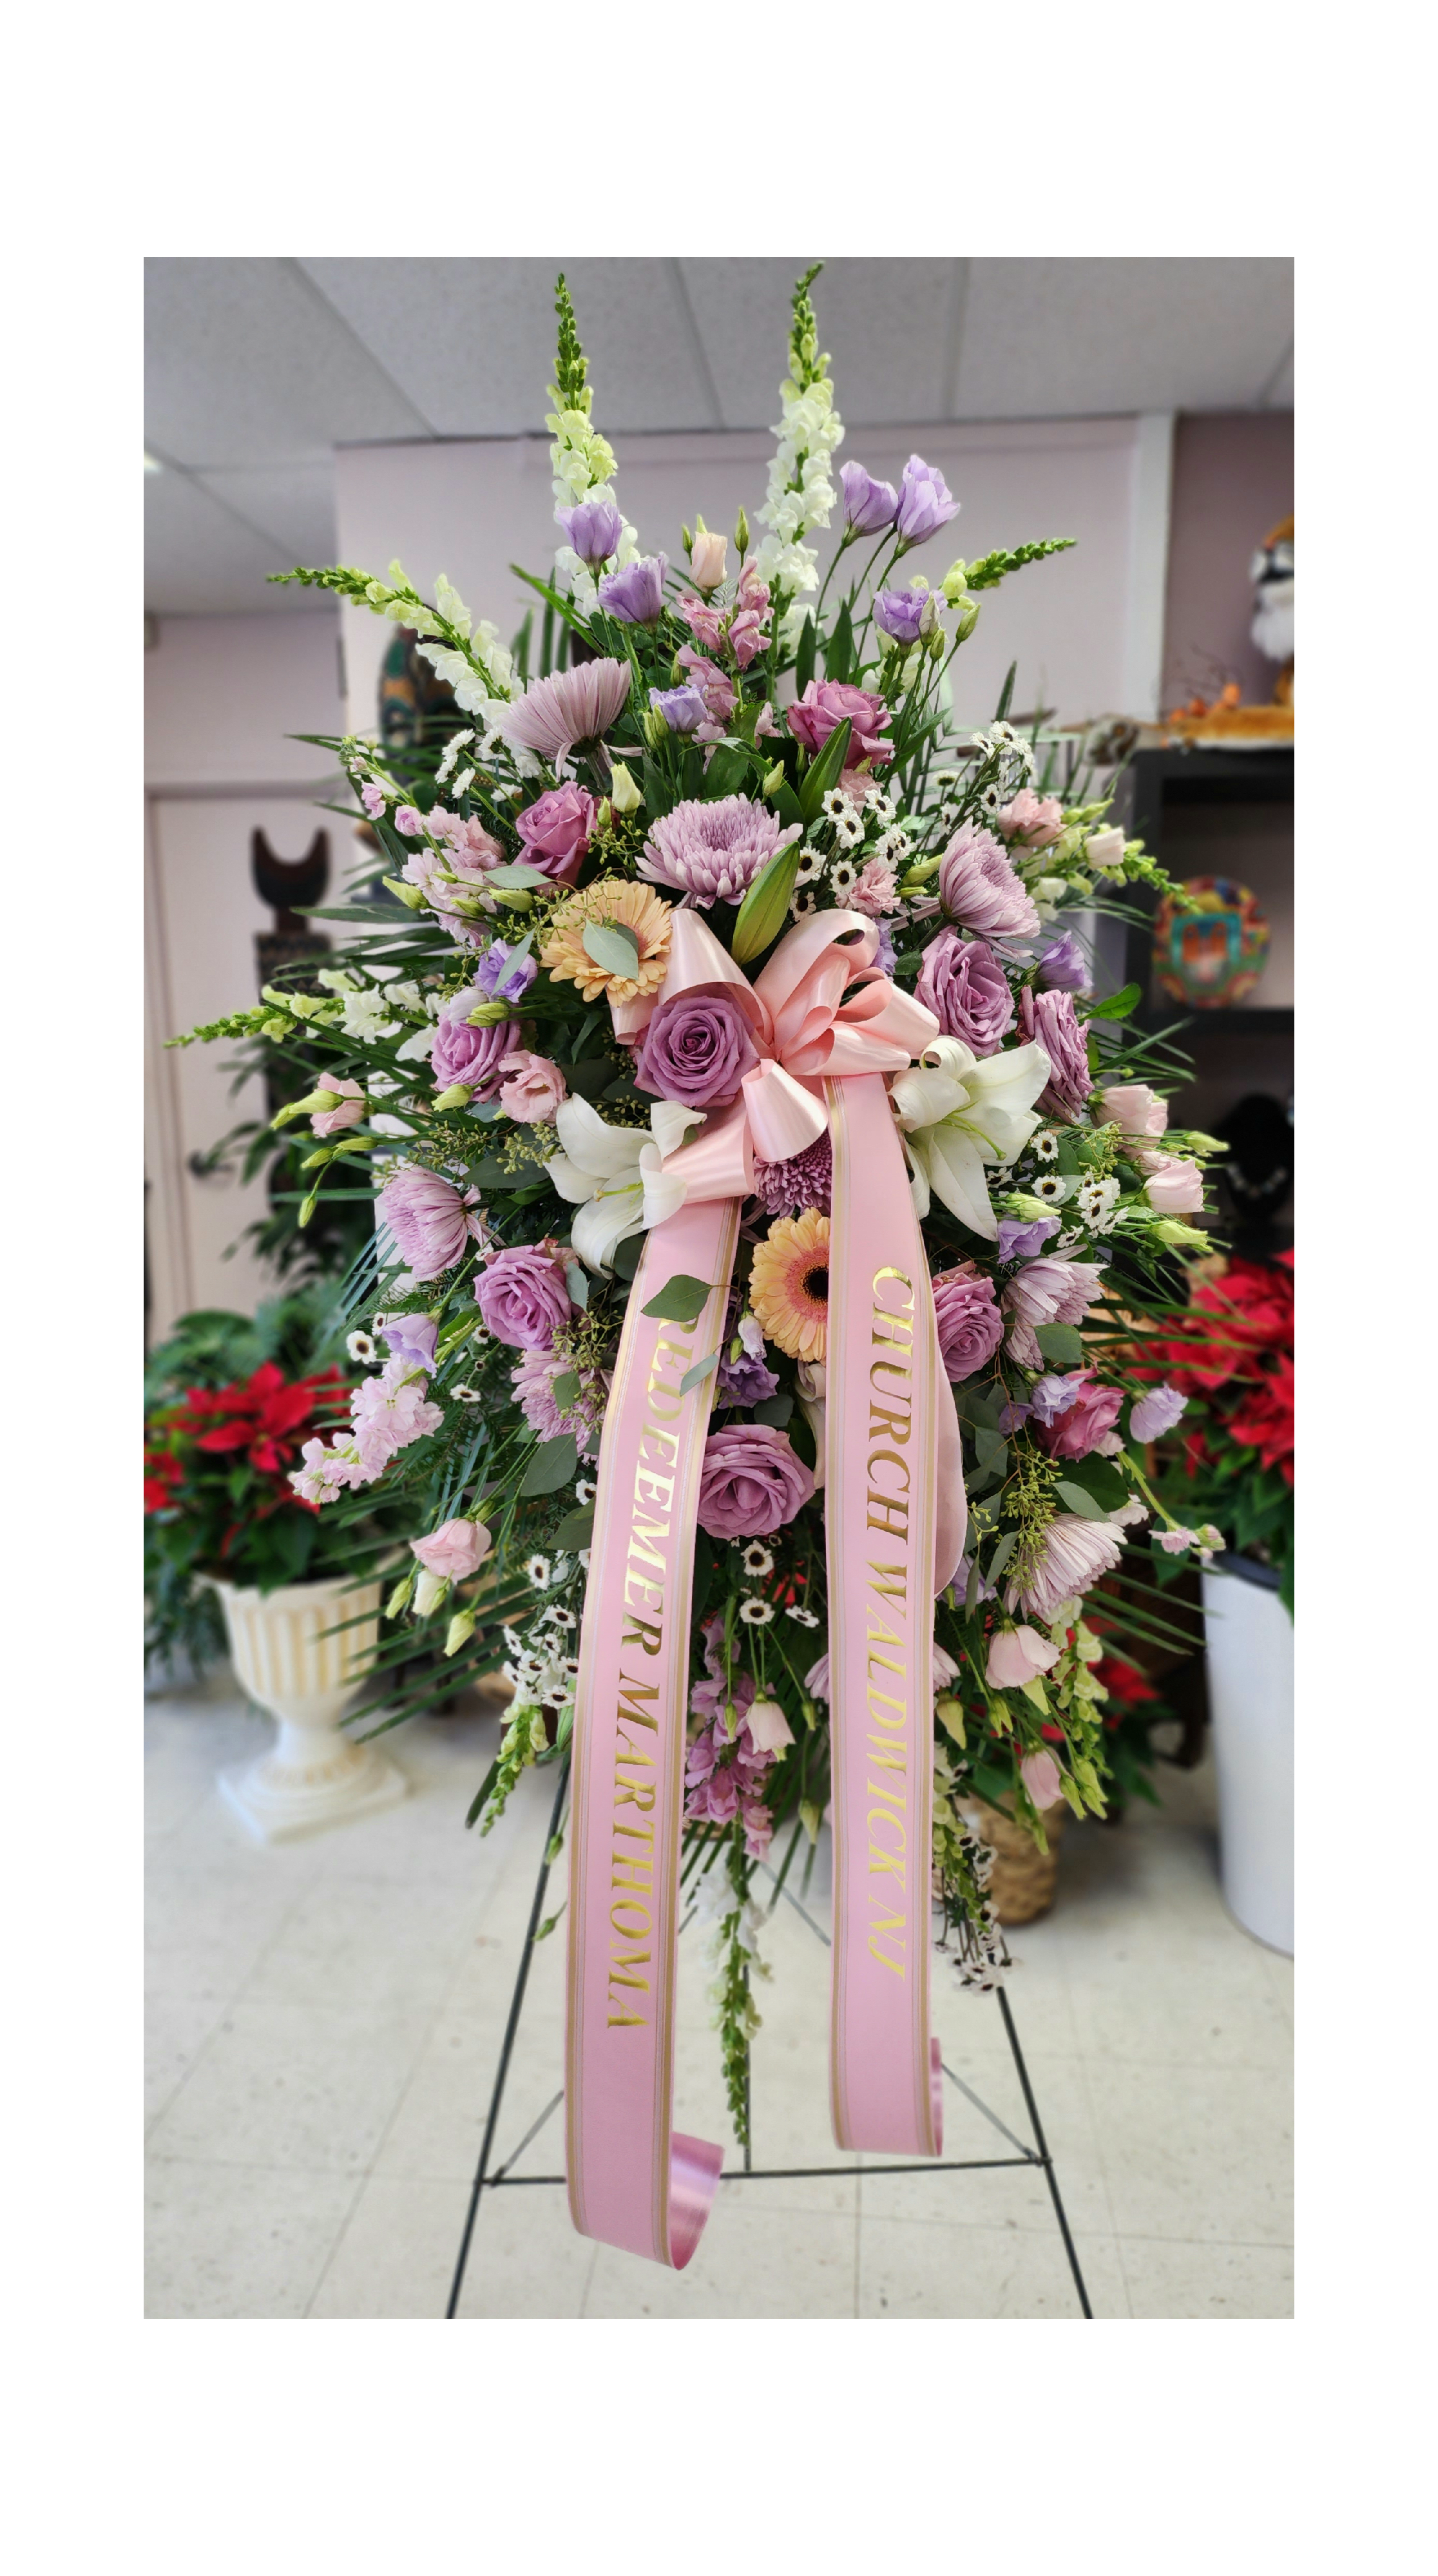 Lavender tribute spray  - Utterly feminine, this spray is an extraordinarily beautiful way to bid farewell to someone who will remain forever in your heart. A bevy of lovely lavender flowers will soothe souls and deliver strength and hope to those in mourning.